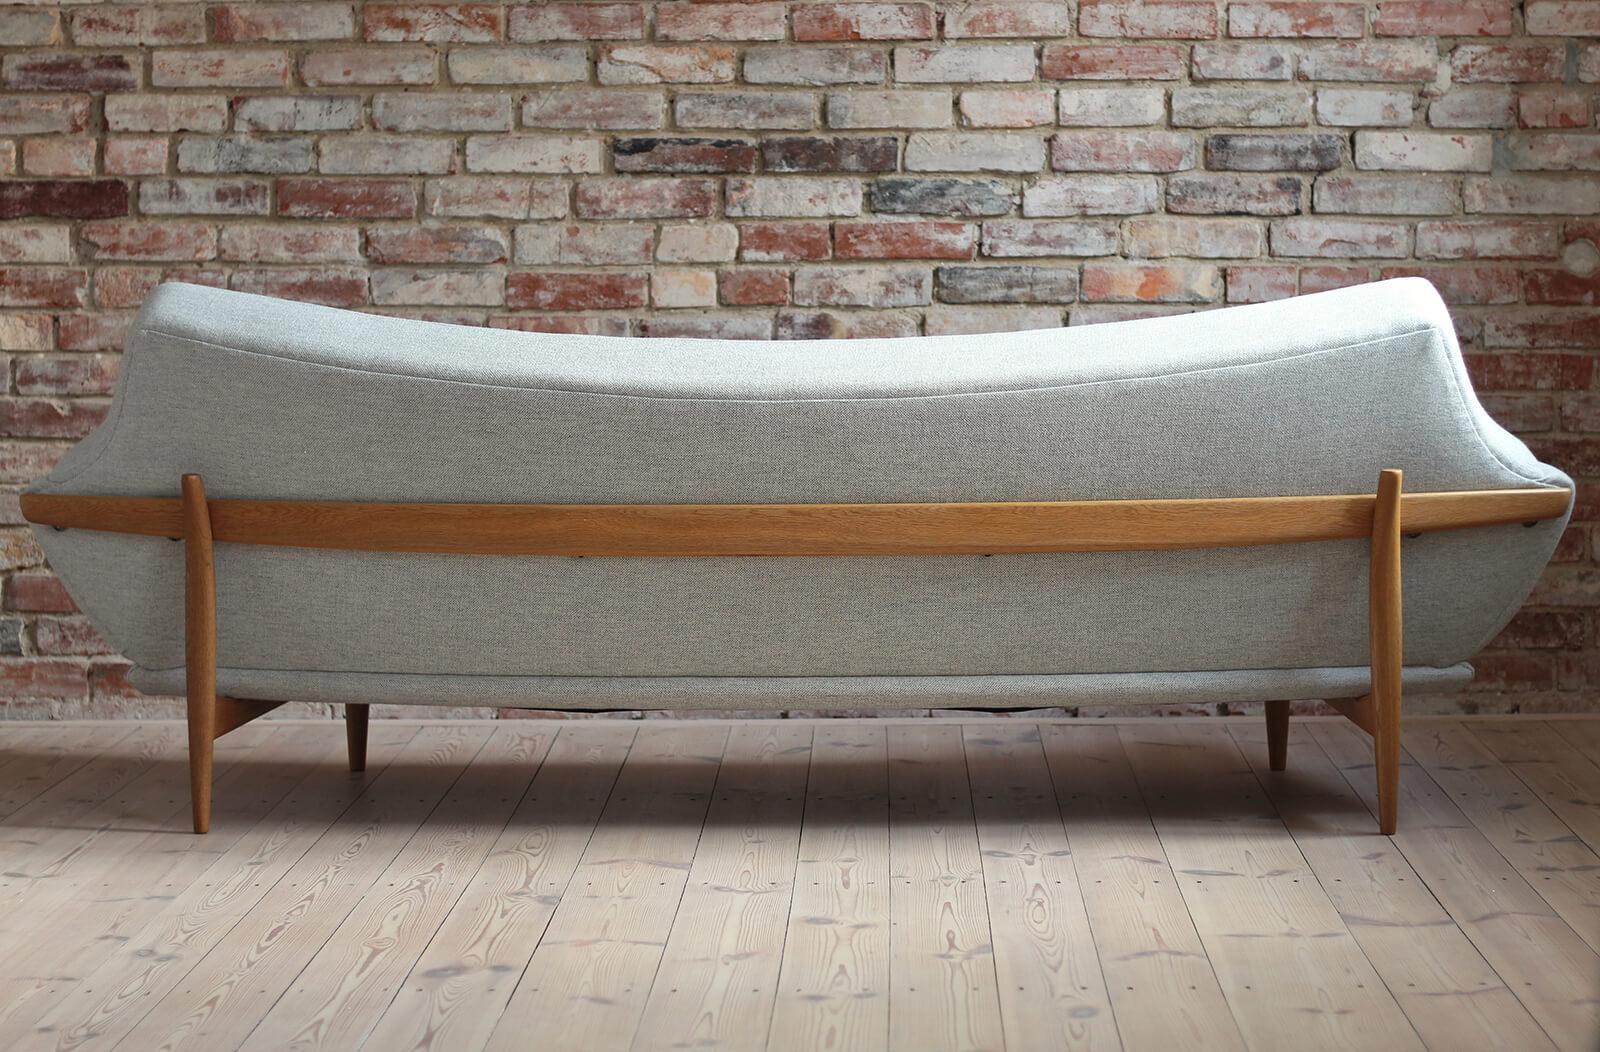 Wood Johannes Andersen Sofa for AB Trensums Reupholstered in Kvadrat Fabric, 1950s